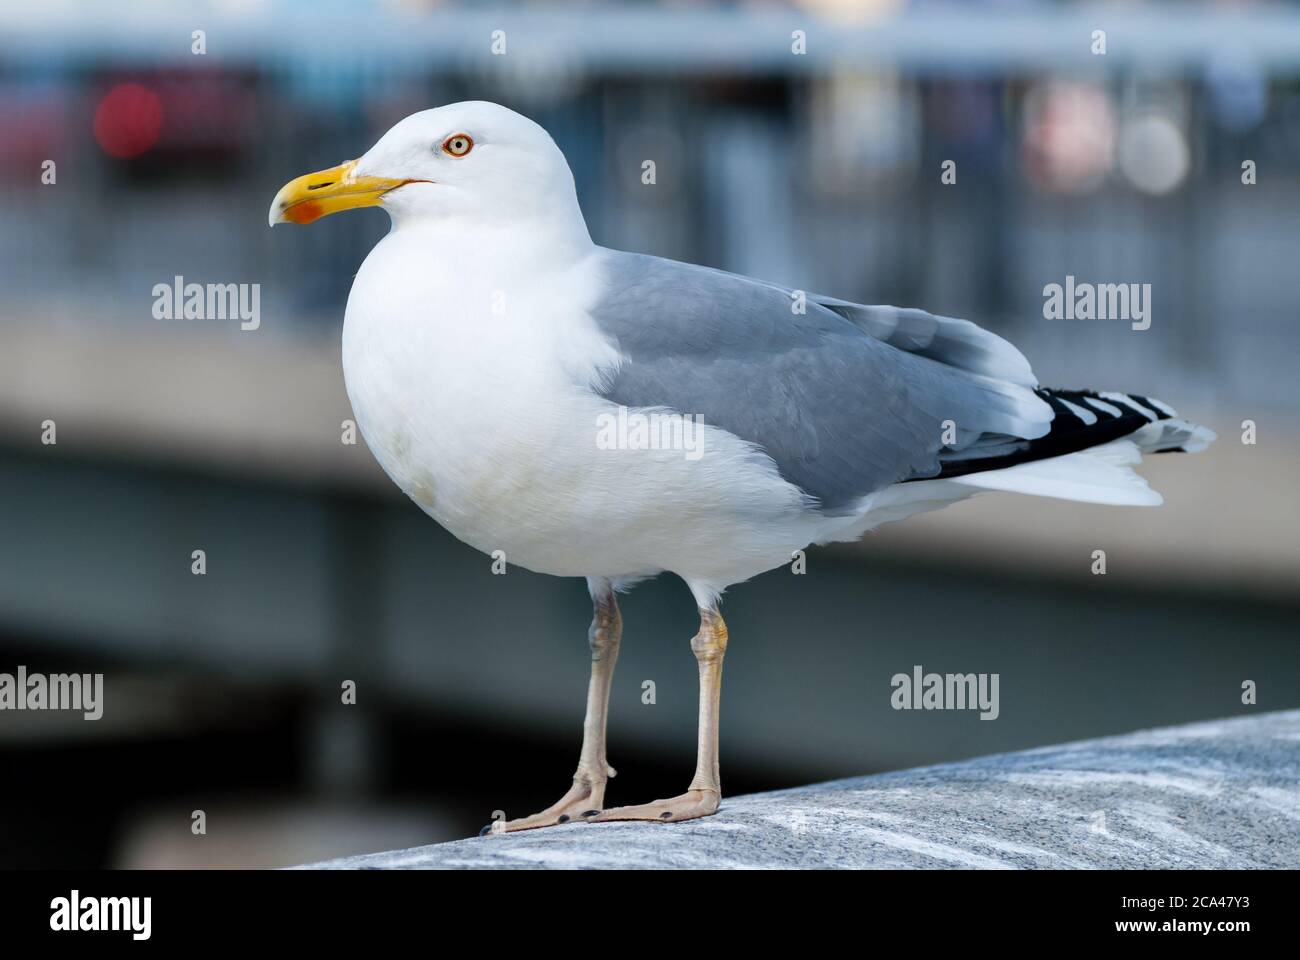 The great black-backed gull (Larus marinus), mistakenly called greater black-backed gull by some, is the largest member of the gull family. Stock Photo